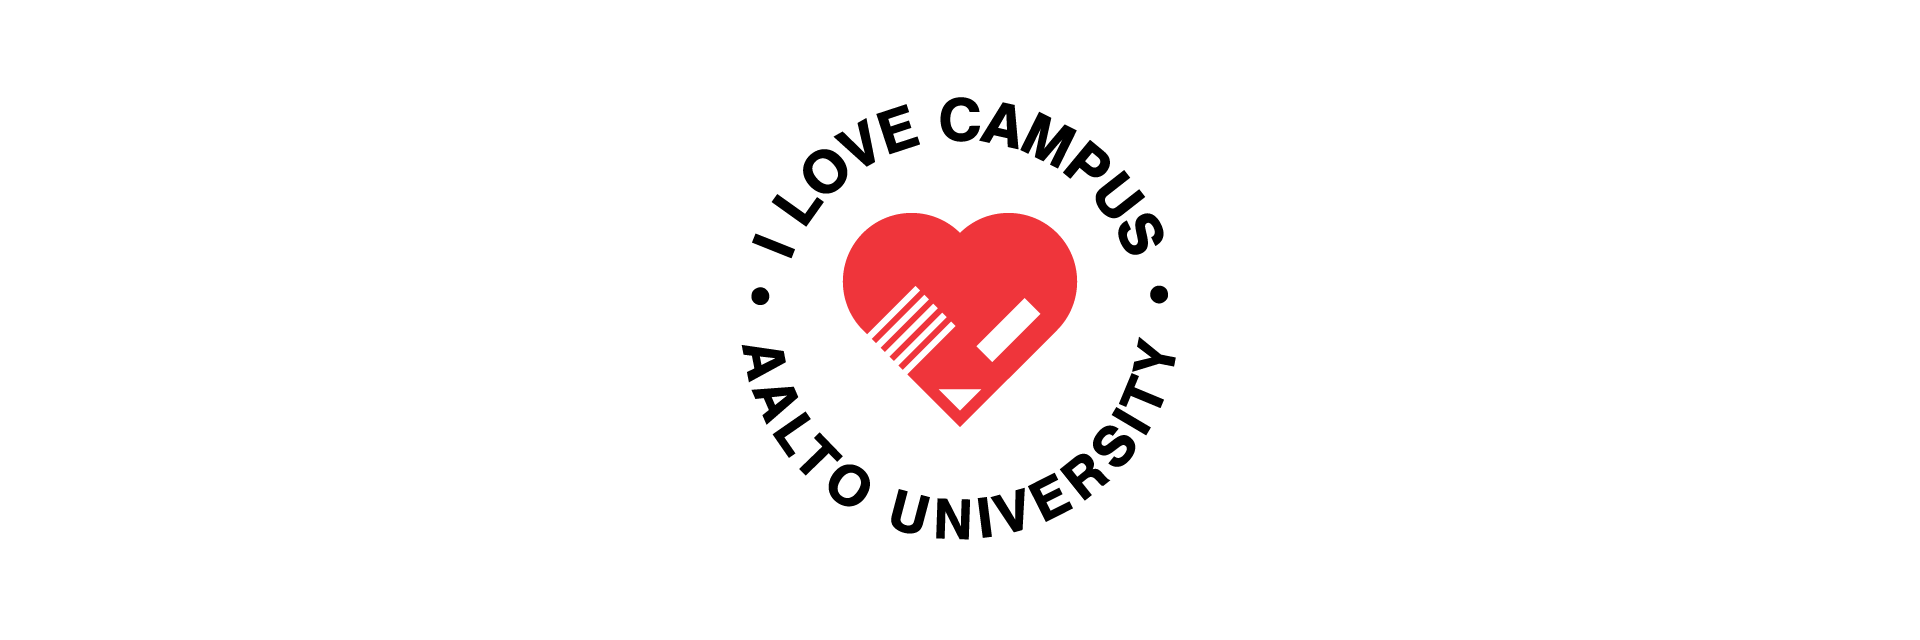 A heart comprised of the Aalto print. I love campus and Aalto University written around the heart.